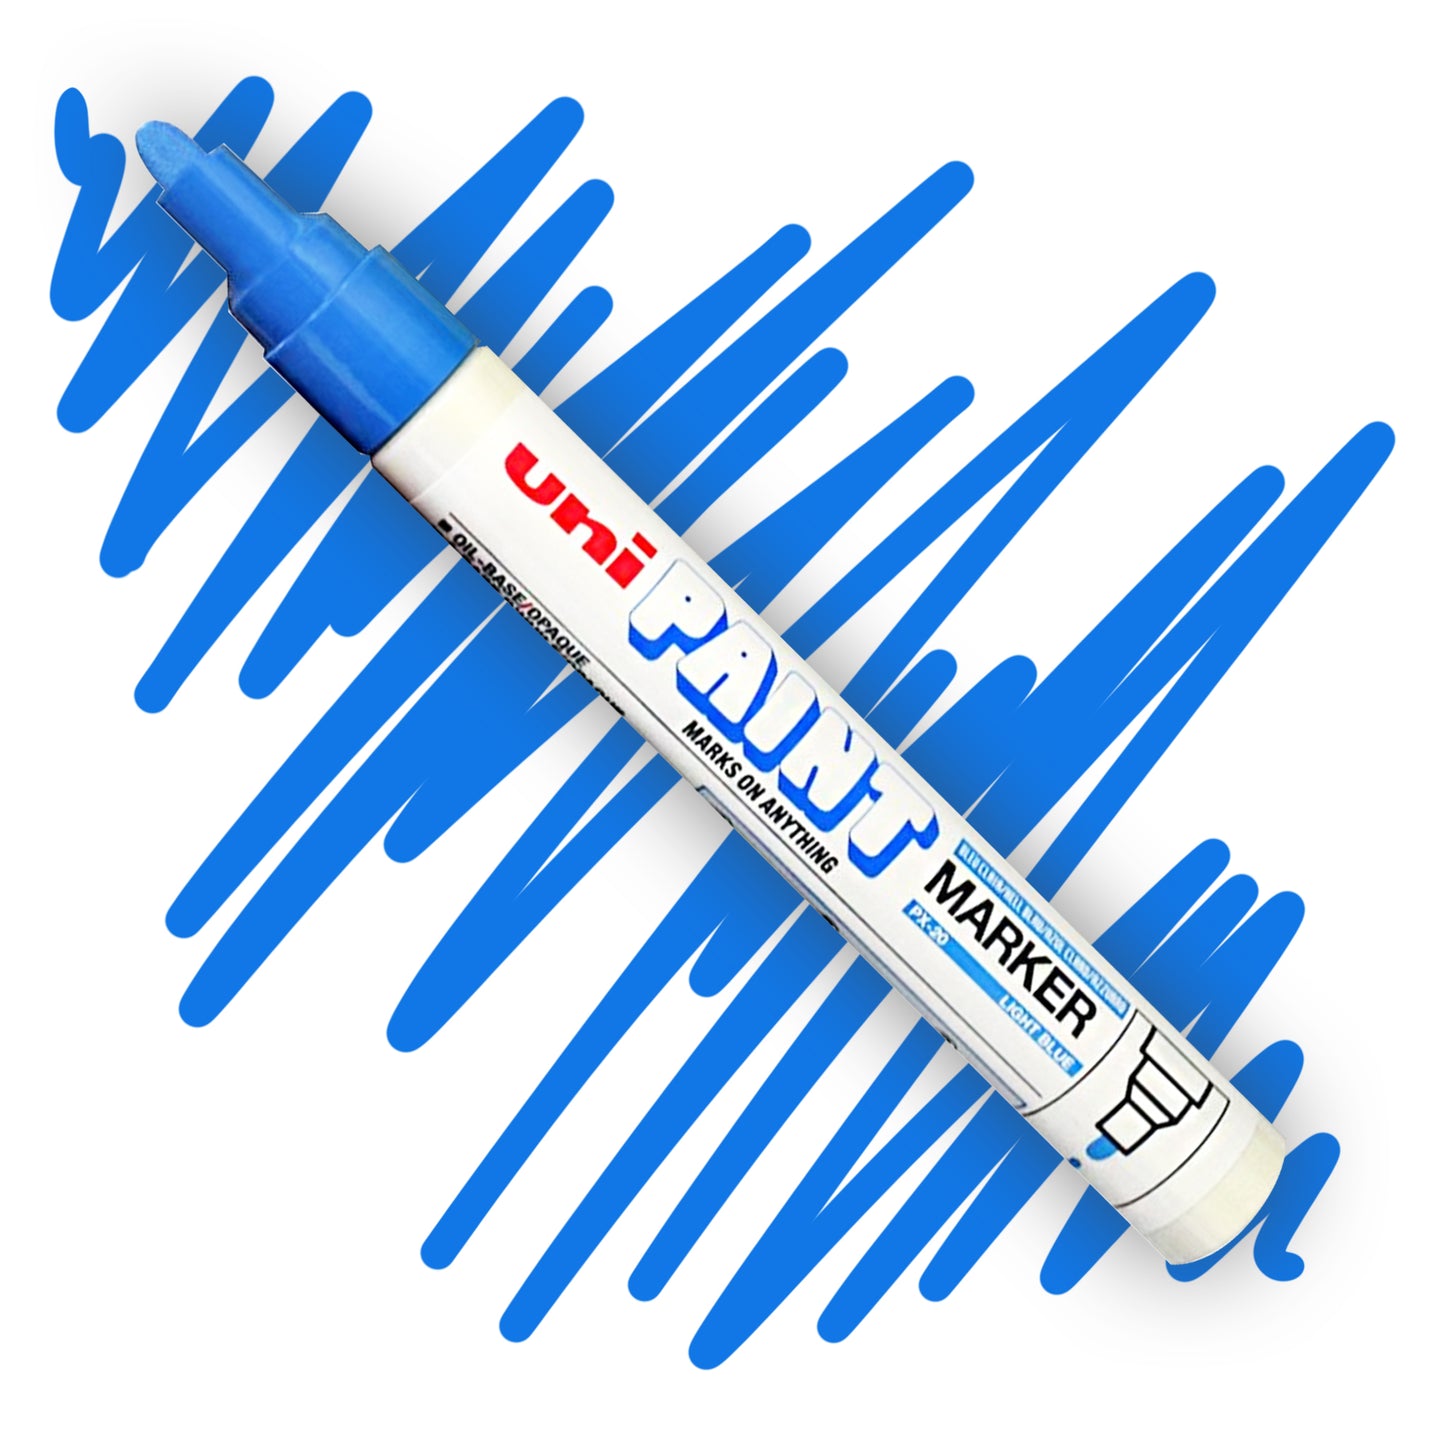 A white marker angled diagonally, the tip of the marker and the nib are colored blue. On the marker body the label reads "Uni PAINT Maker". Behind the marker is a color swatch of a squiggly line in blue.